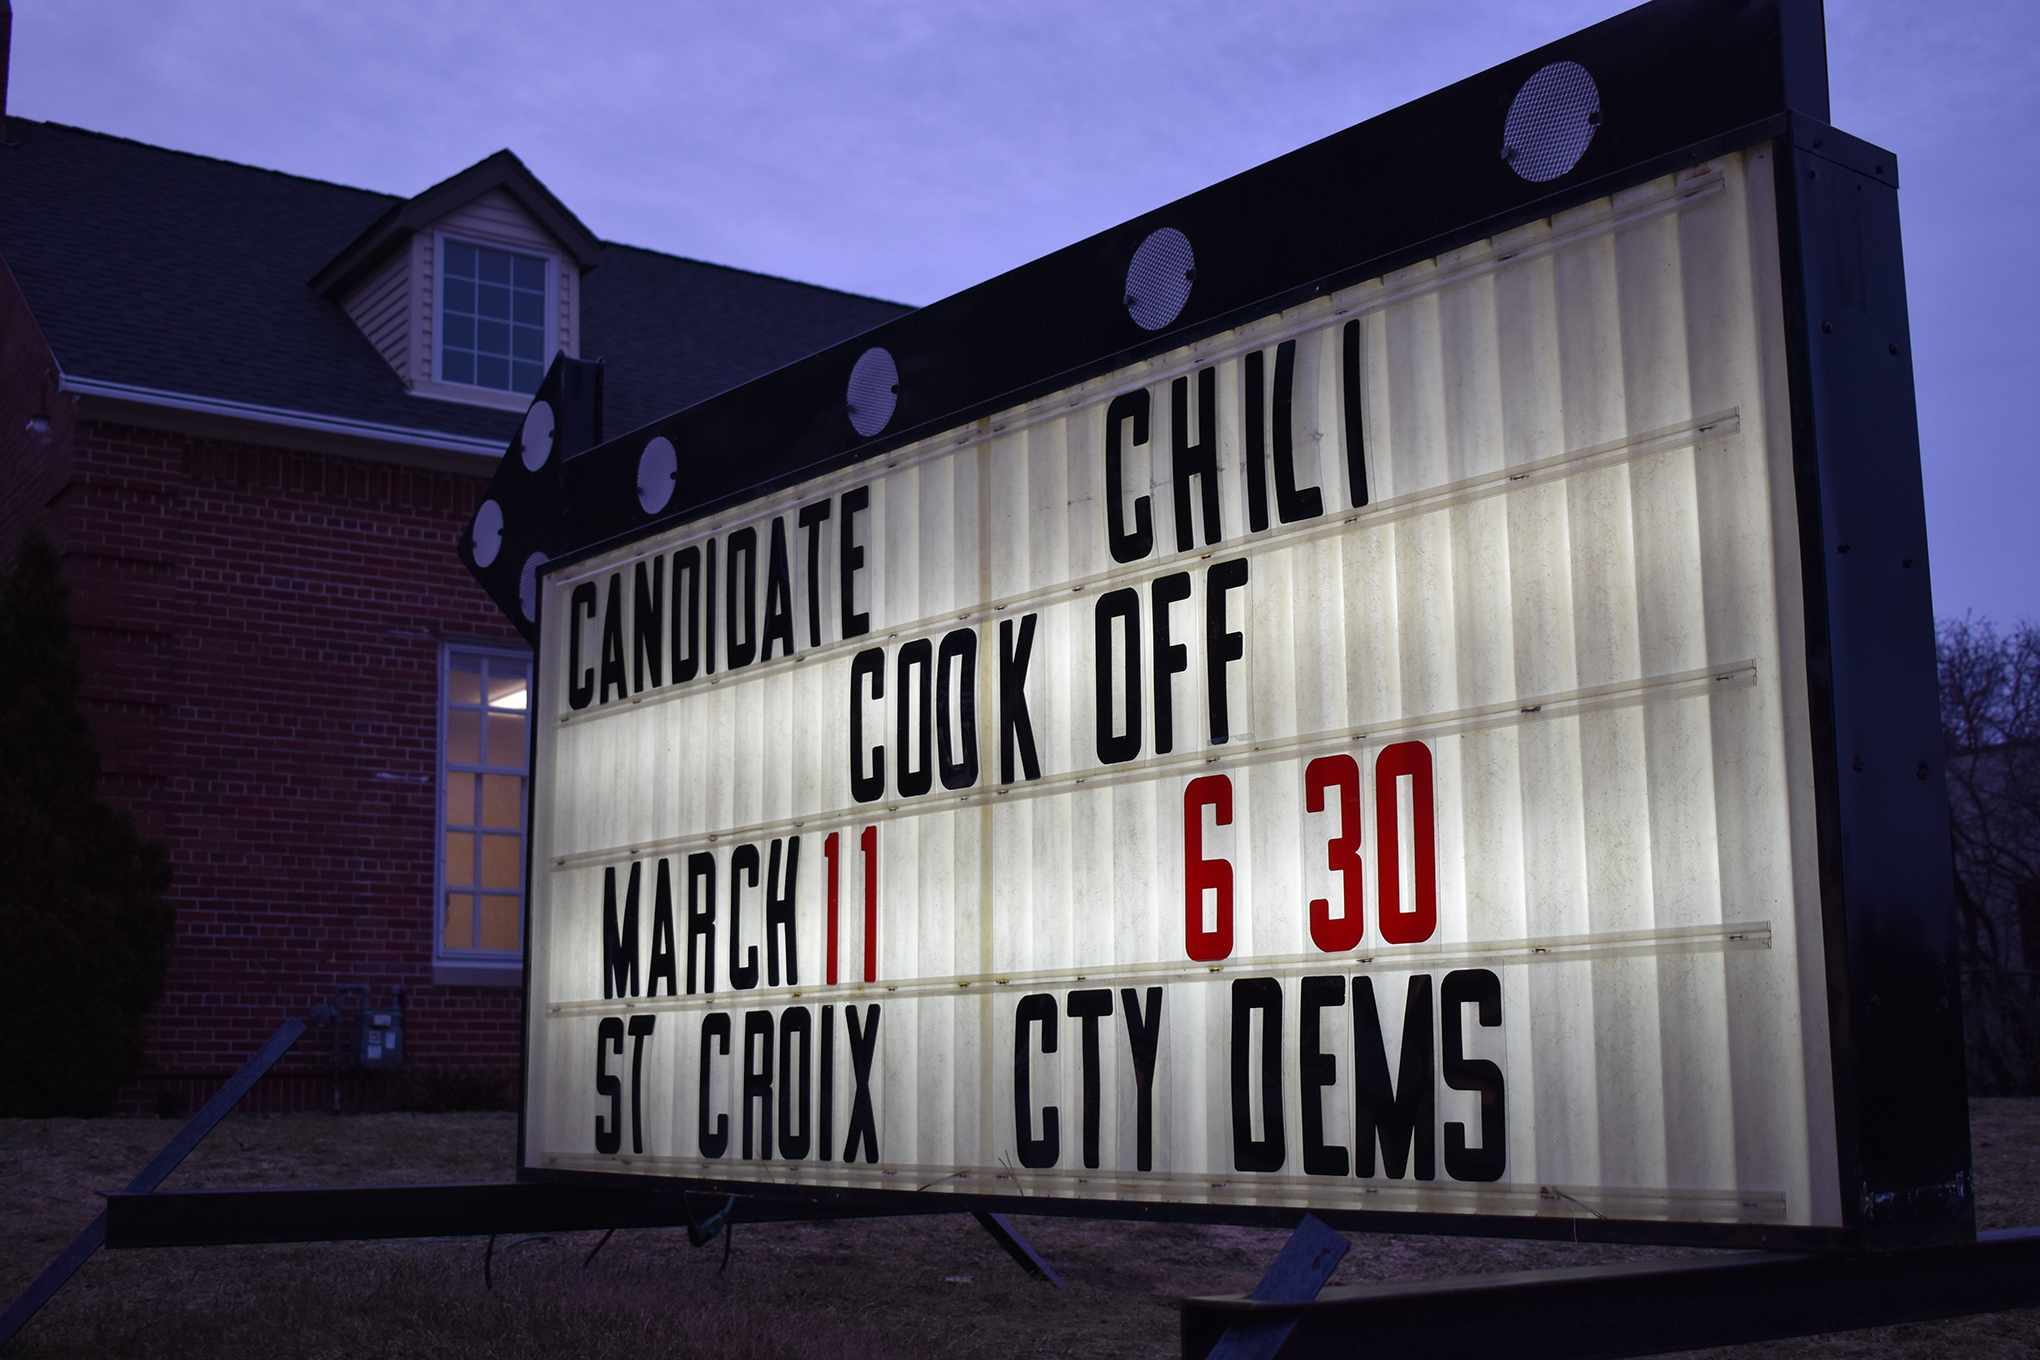 The St. Croix County Democratic Party hosted a chili cookoff and candidate meetup on March 11